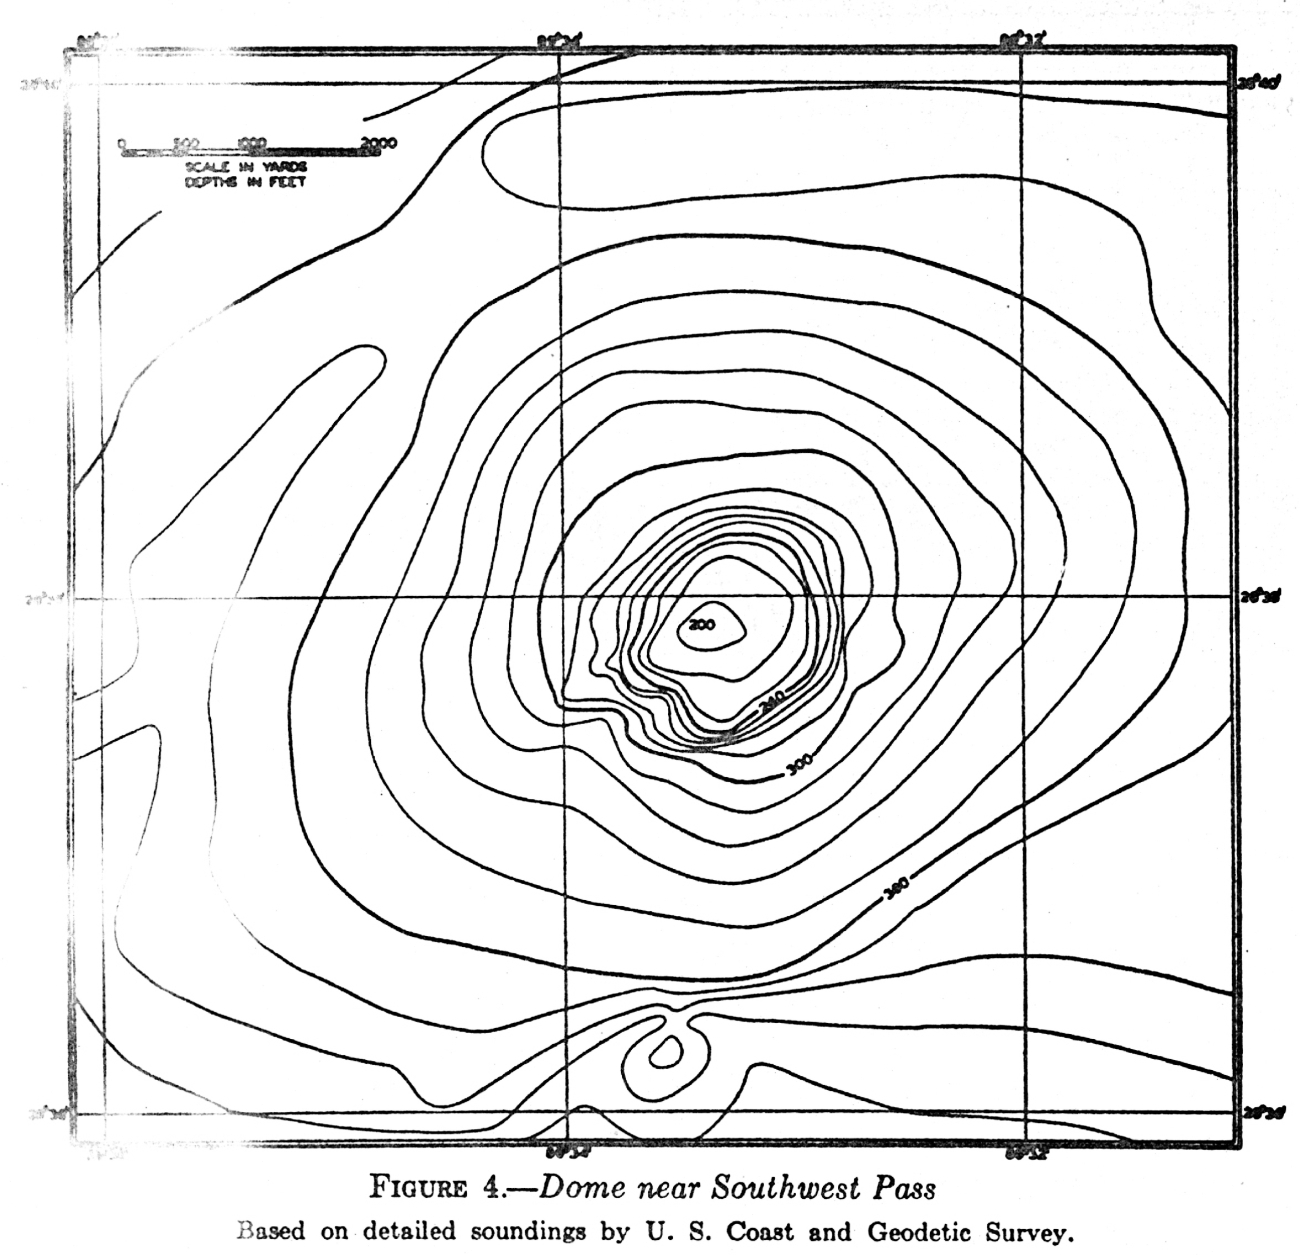 A single salt dome off Southwest Pass of the Mississippi River discovered bythe Coast and Geodetic Survey, contoured by Francis Shepard